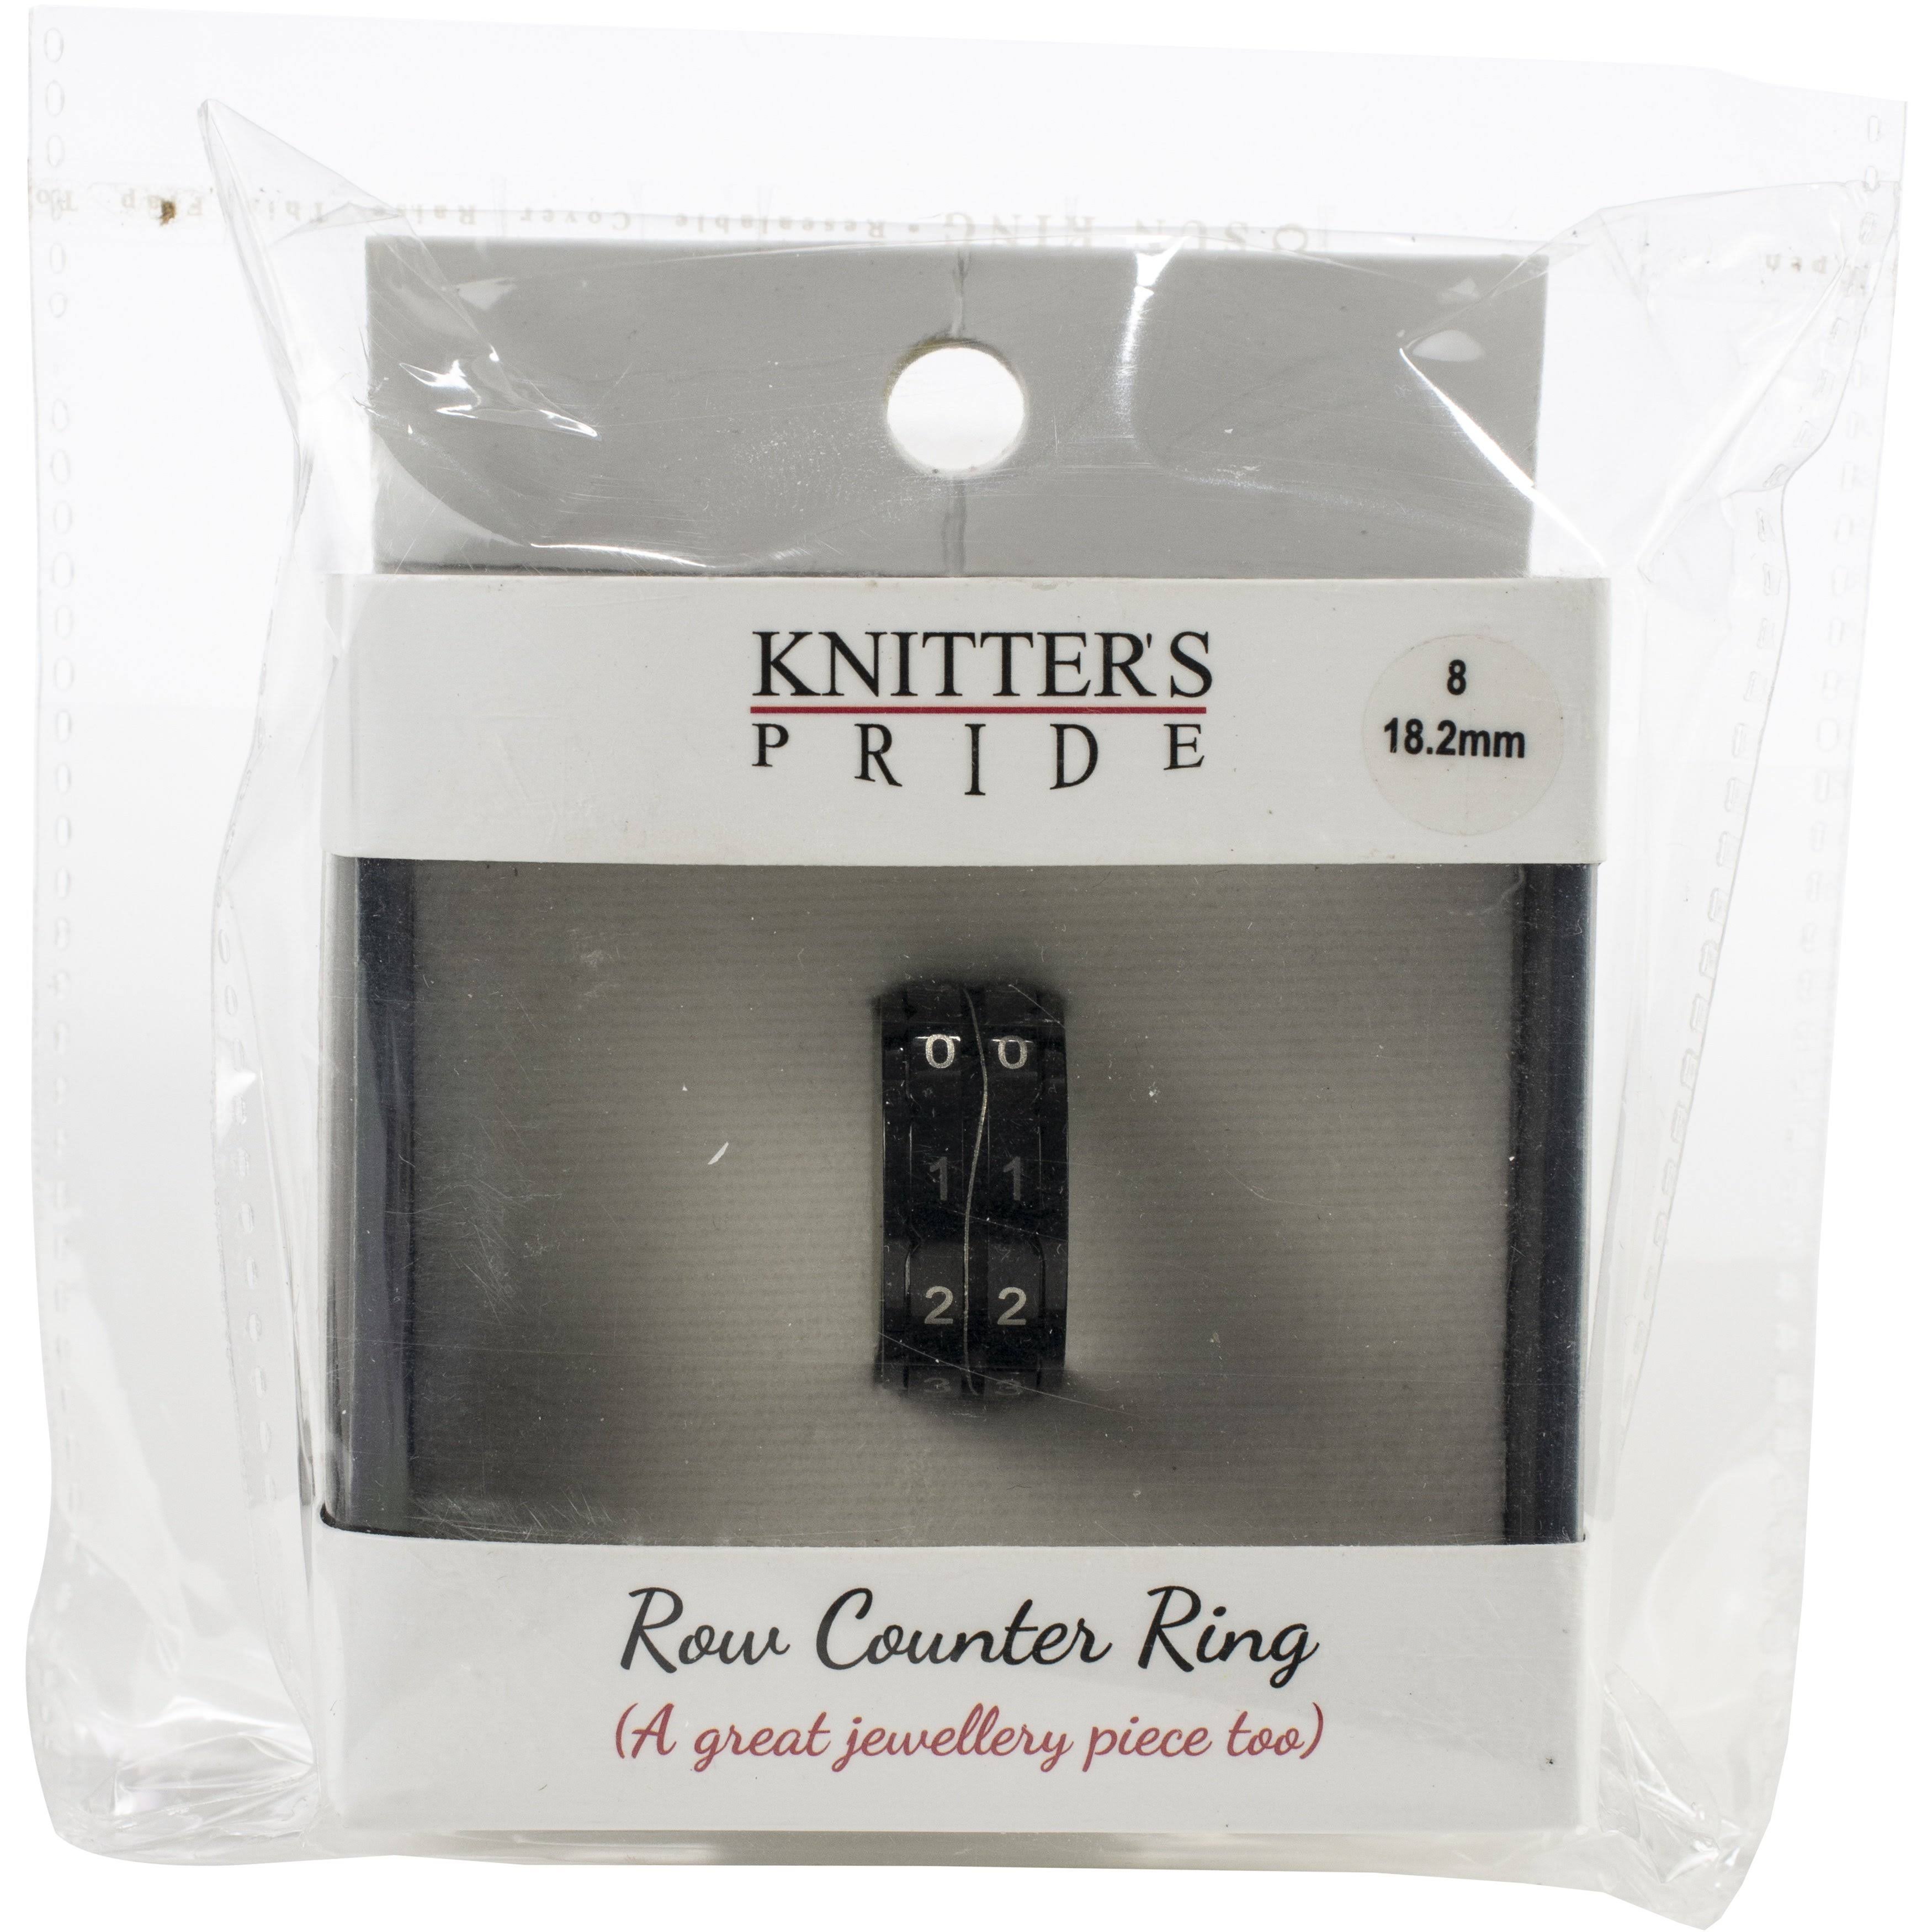 Knitter's Pride Row Counter Ring-size 9: 19.0mm Diameter